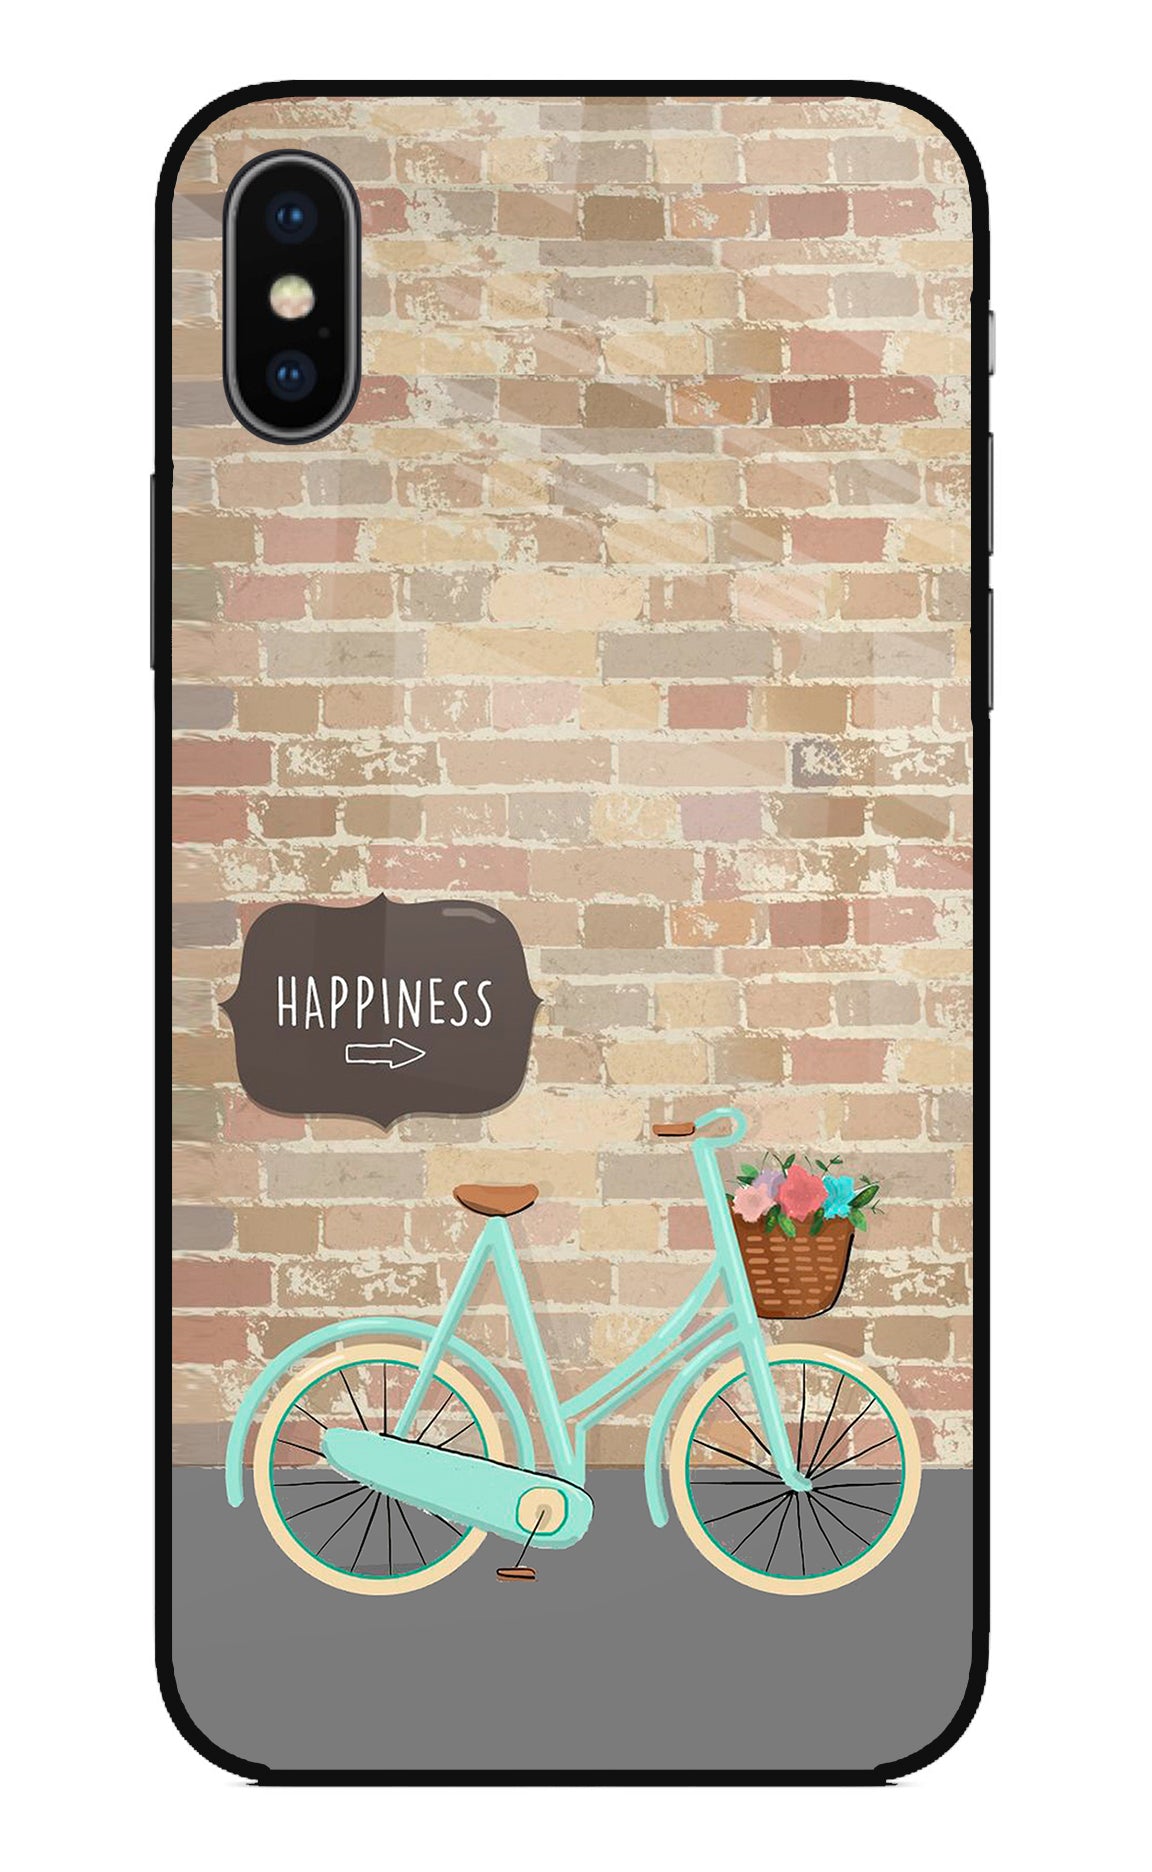 Happiness Artwork iPhone X Back Cover